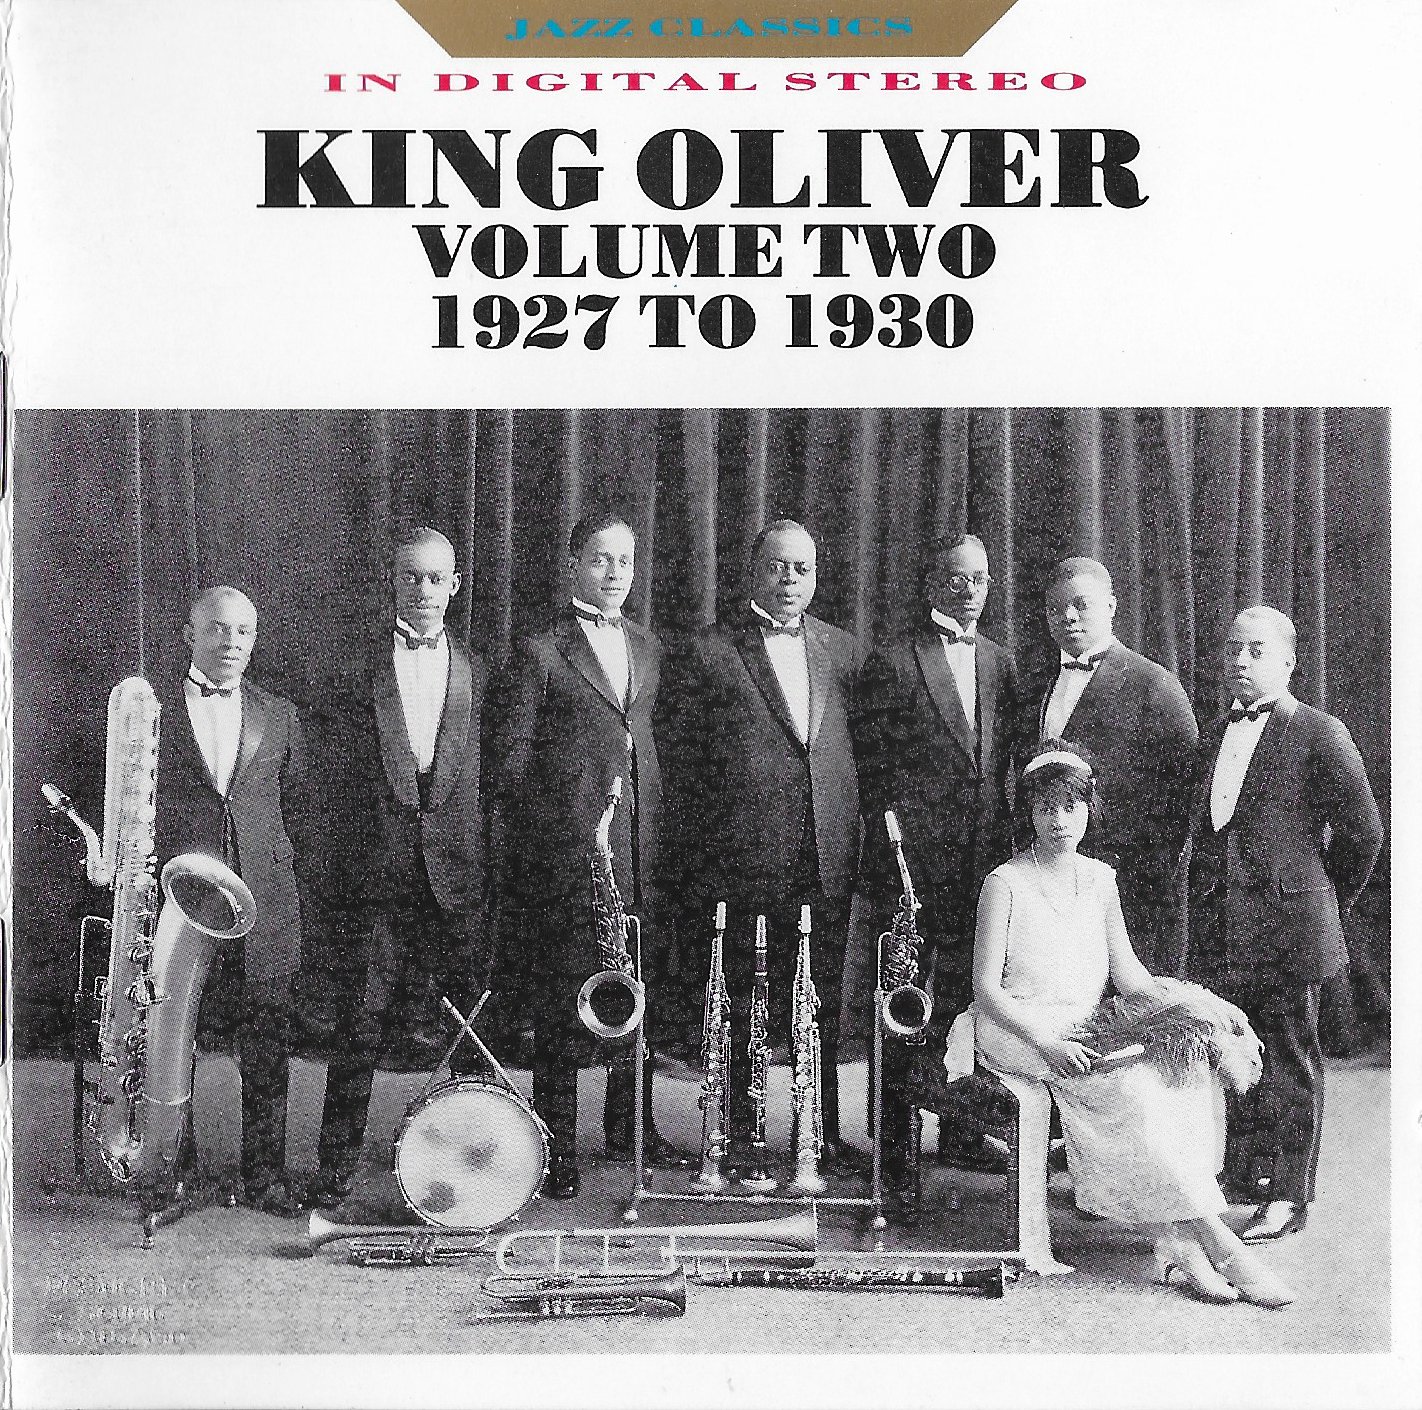 Picture of RPCD 788 King Oliver - Volume 2 1927 - 1930 by artist Joe Oliver from the BBC cds - Records and Tapes library